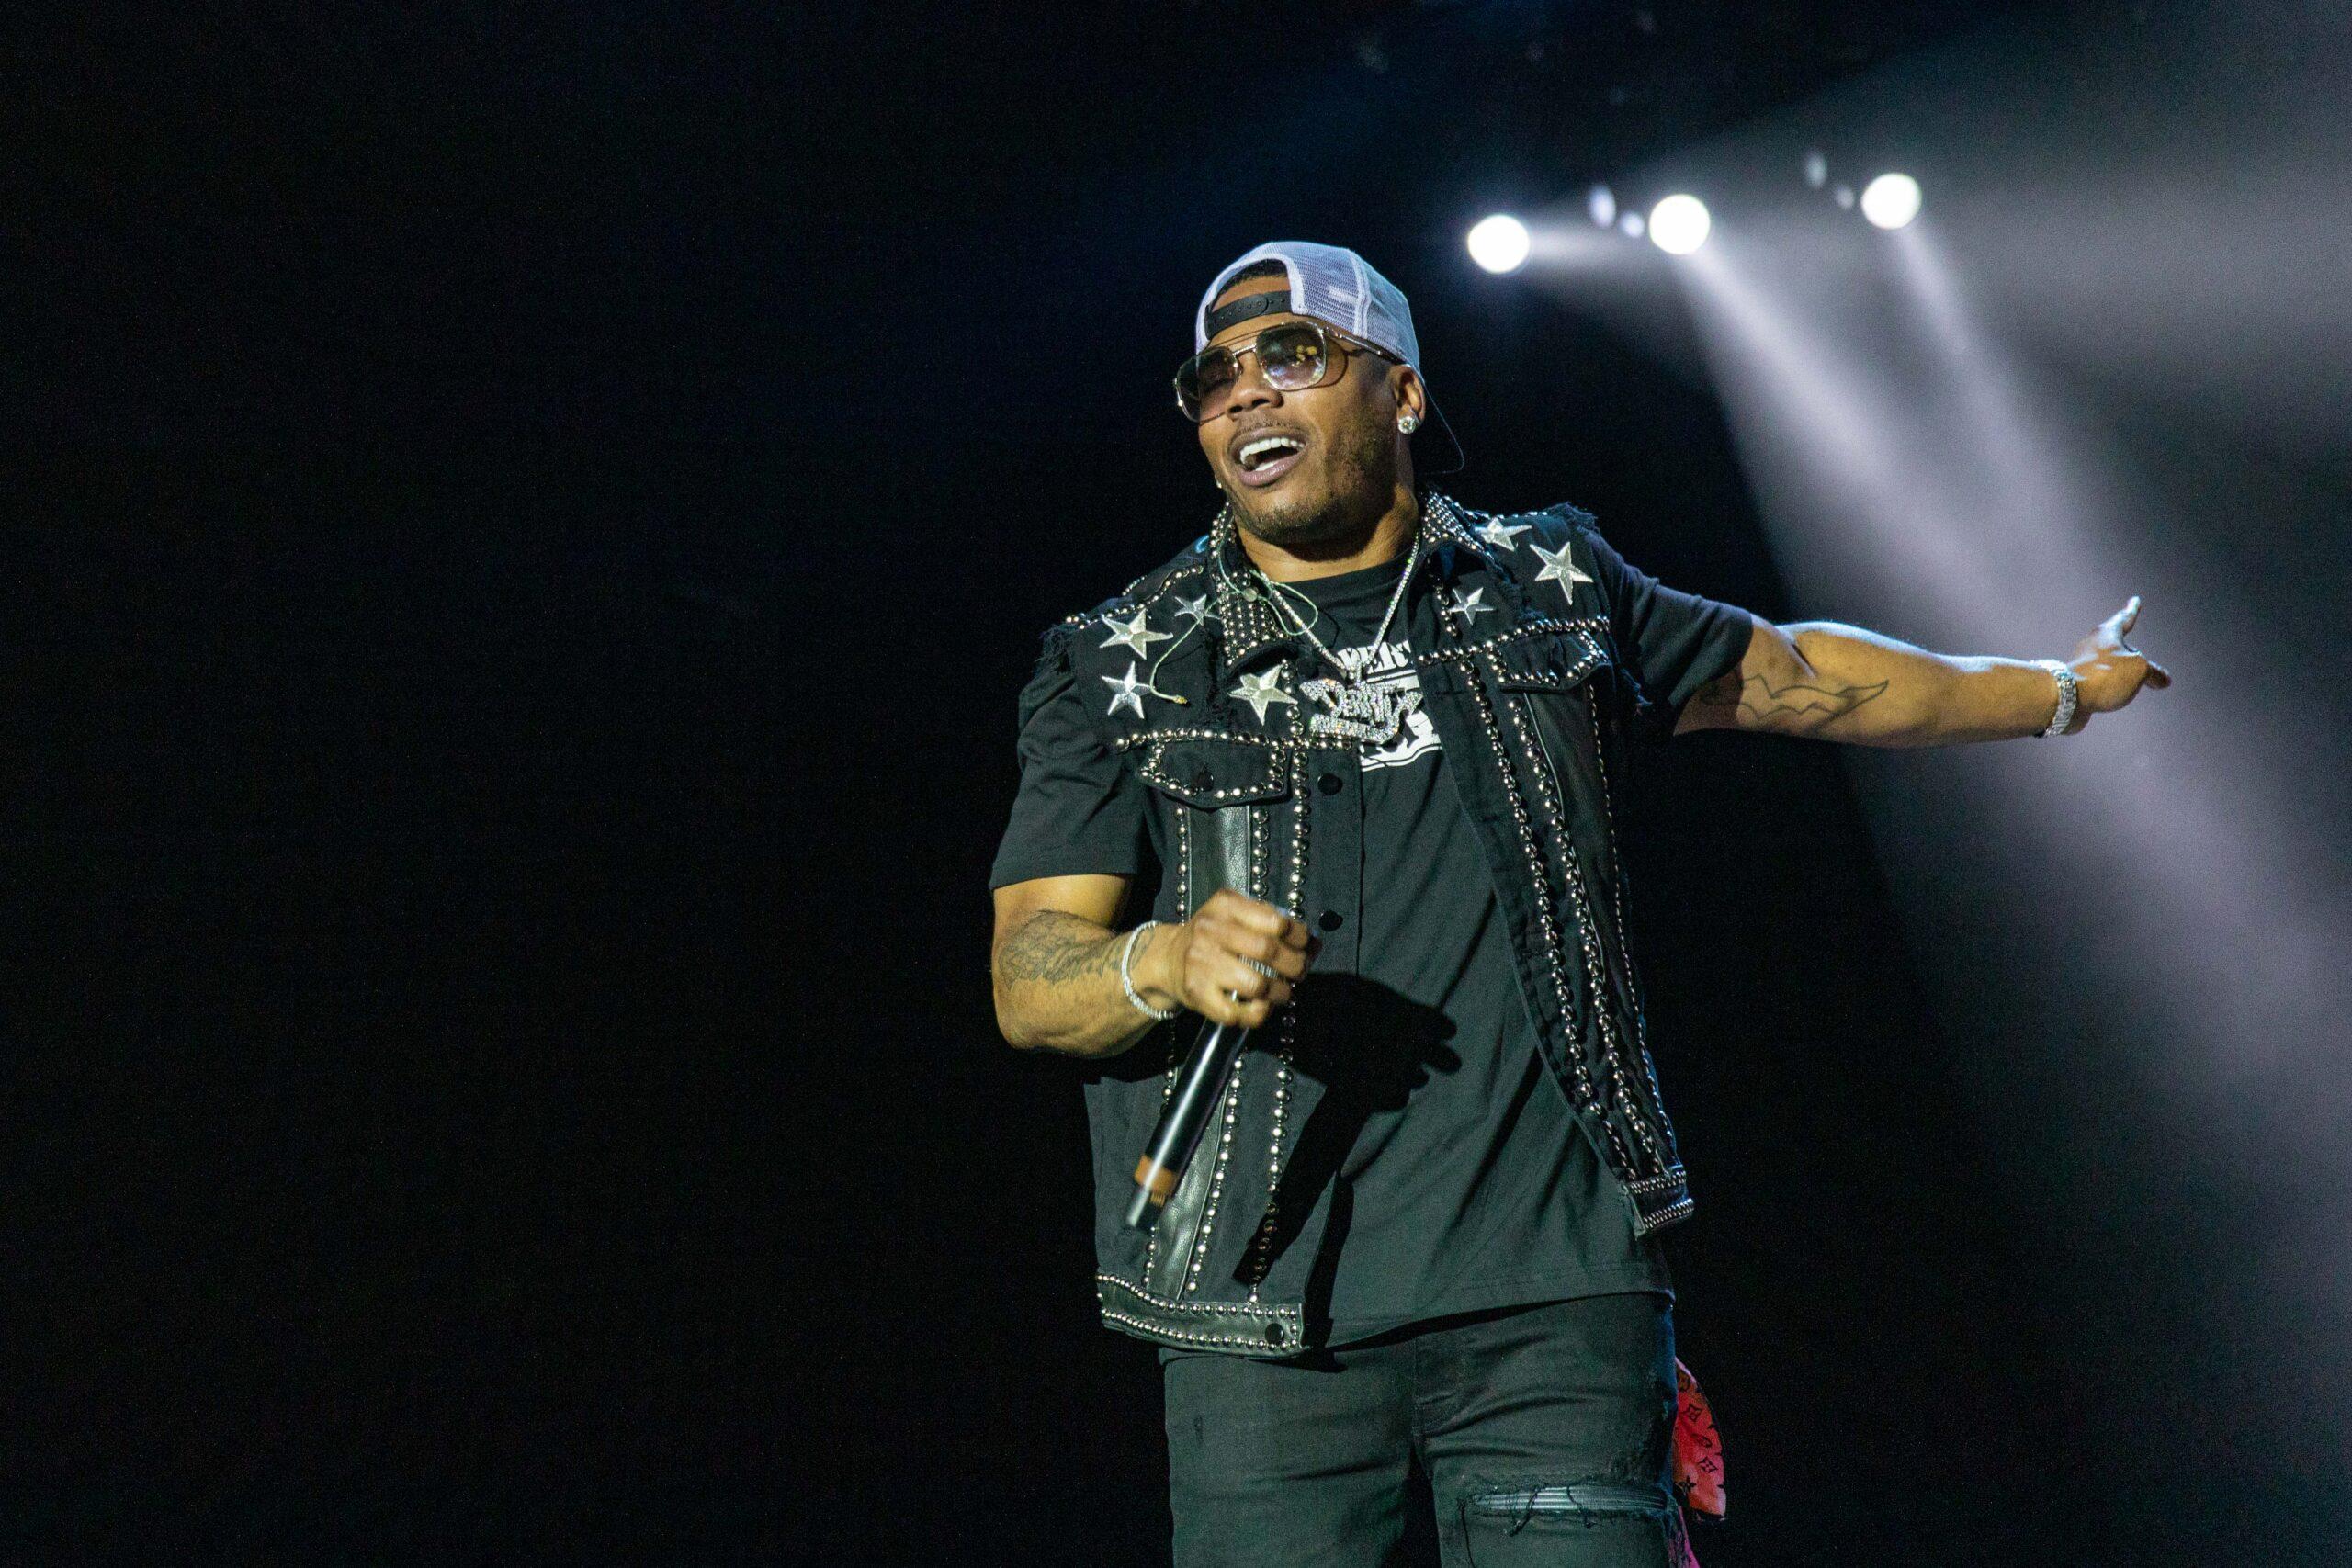 Rapper Nelly at the Summerfest Music Festival 2021 in Milwaukee